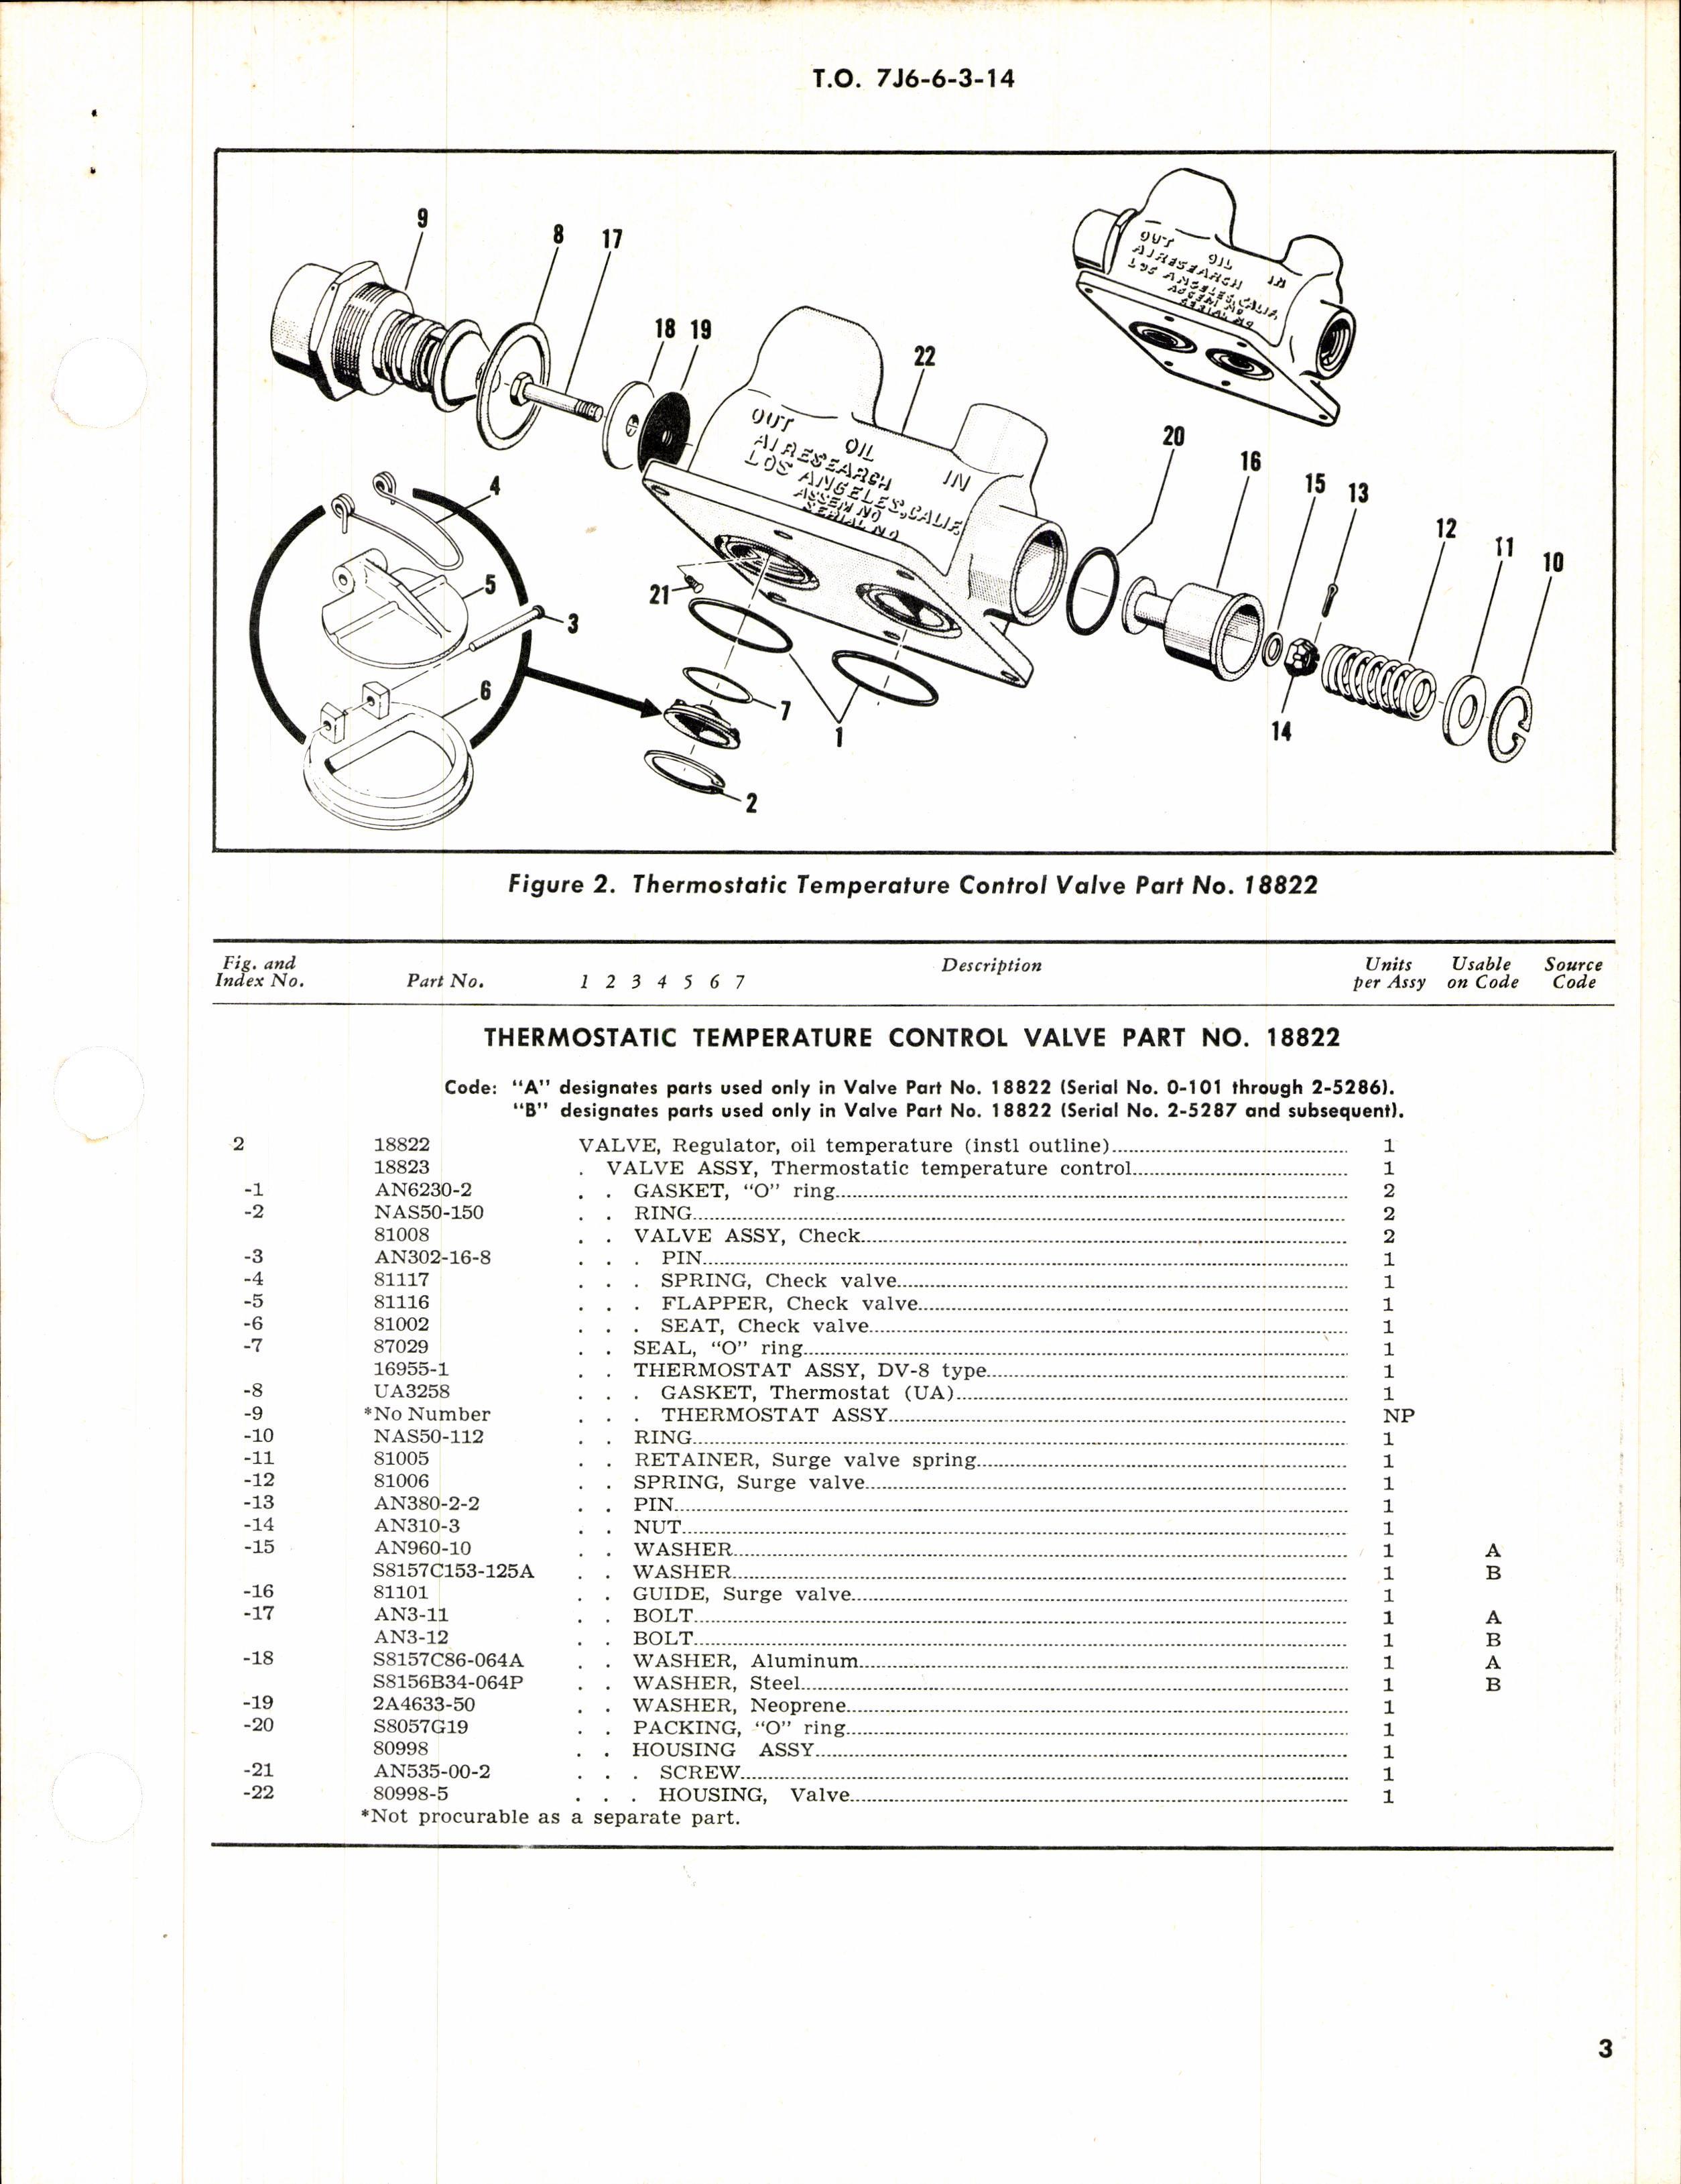 Sample page 3 from AirCorps Library document: Illustrated Parts Breakdown for Thermostatic Temperature Control Valves